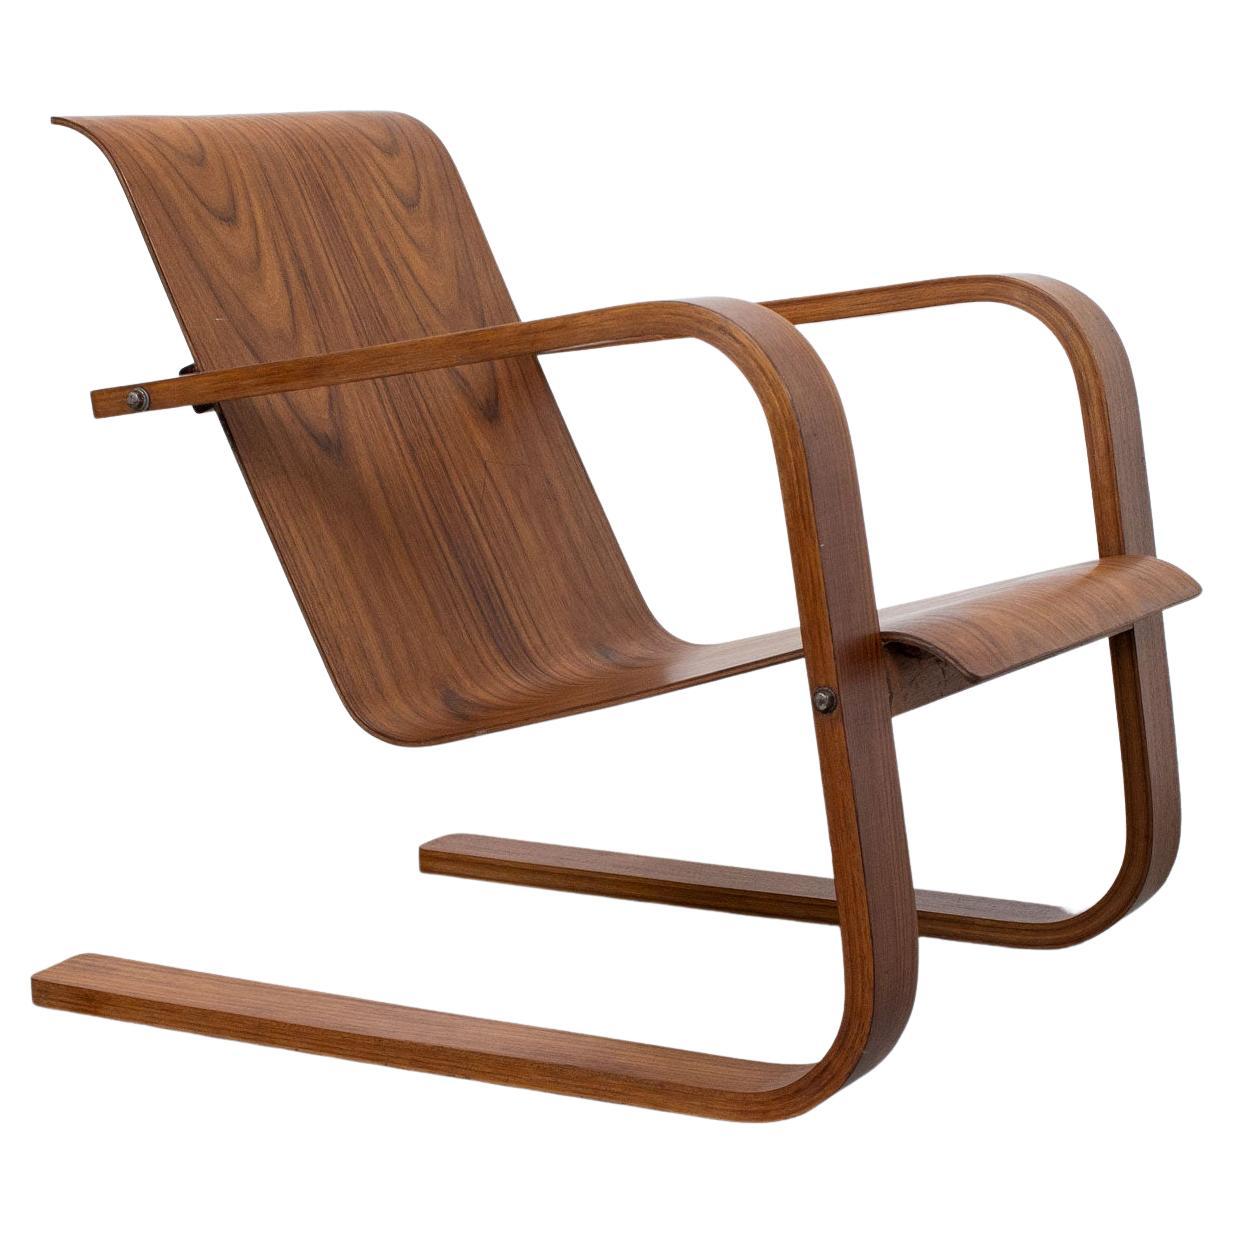 1930s Modernist Cantilever Plywood Armchair For Sale